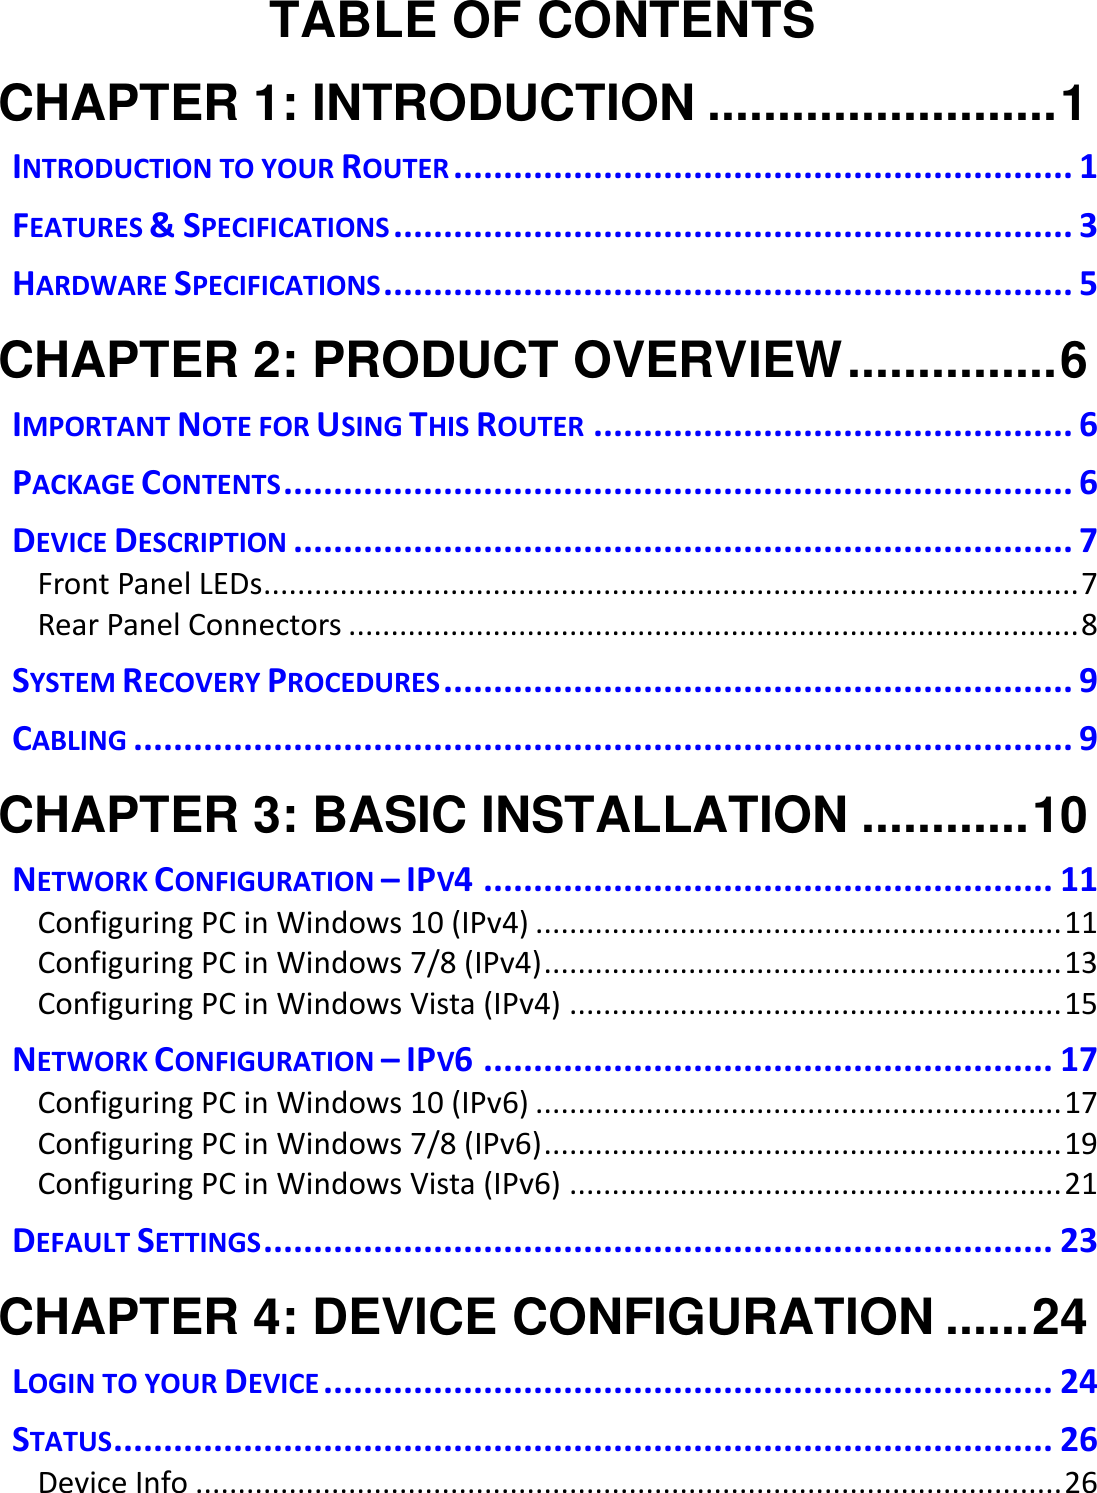   TABLE OF CONTENTS CHAPTER 1: INTRODUCTION ......................... 1 INTRODUCTION TO YOUR ROUTER .............................................................. 1 FEATURES &amp; SPECIFICATIONS .................................................................... 3 HARDWARE SPECIFICATIONS ..................................................................... 5 CHAPTER 2: PRODUCT OVERVIEW ............... 6 IMPORTANT NOTE FOR USING THIS ROUTER ................................................ 6 PACKAGE CONTENTS ............................................................................... 6 DEVICE DESCRIPTION .............................................................................. 7 Front Panel LEDs................................................................................................ 7 Rear Panel Connectors ...................................................................................... 8 SYSTEM RECOVERY PROCEDURES ............................................................... 9 CABLING .............................................................................................. 9 CHAPTER 3: BASIC INSTALLATION ............ 10 NETWORK CONFIGURATION – IPV4 ......................................................... 11 Configuring PC in Windows 10 (IPv4) .............................................................. 11 Configuring PC in Windows 7/8 (IPv4) ............................................................. 13 Configuring PC in Windows Vista (IPv4) .......................................................... 15 NETWORK CONFIGURATION – IPV6 ......................................................... 17 Configuring PC in Windows 10 (IPv6) .............................................................. 17 Configuring PC in Windows 7/8 (IPv6) ............................................................. 19 Configuring PC in Windows Vista (IPv6) .......................................................... 21 DEFAULT SETTINGS ............................................................................... 23 CHAPTER 4: DEVICE CONFIGURATION ...... 24 LOGIN TO YOUR DEVICE ......................................................................... 24 STATUS .............................................................................................. 26 Device Info ...................................................................................................... 26 